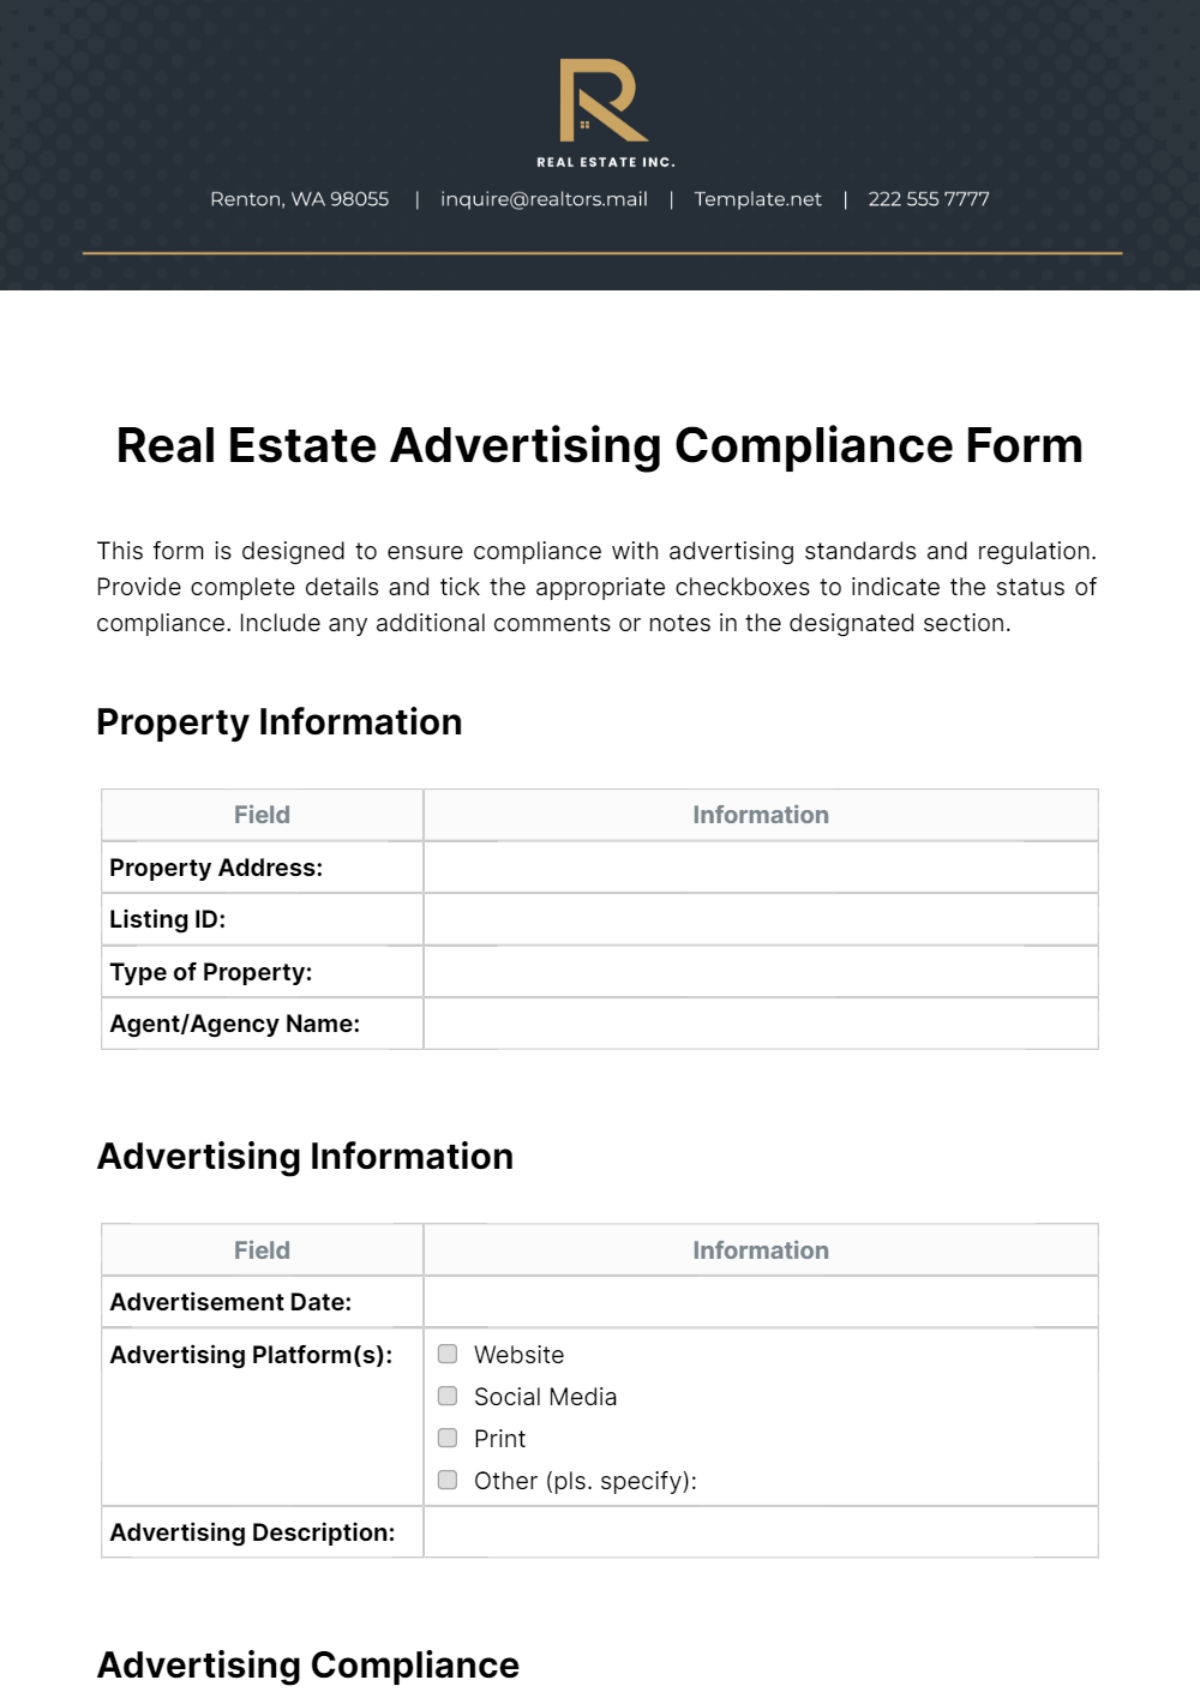 Real Estate Advertising Compliance Form Template